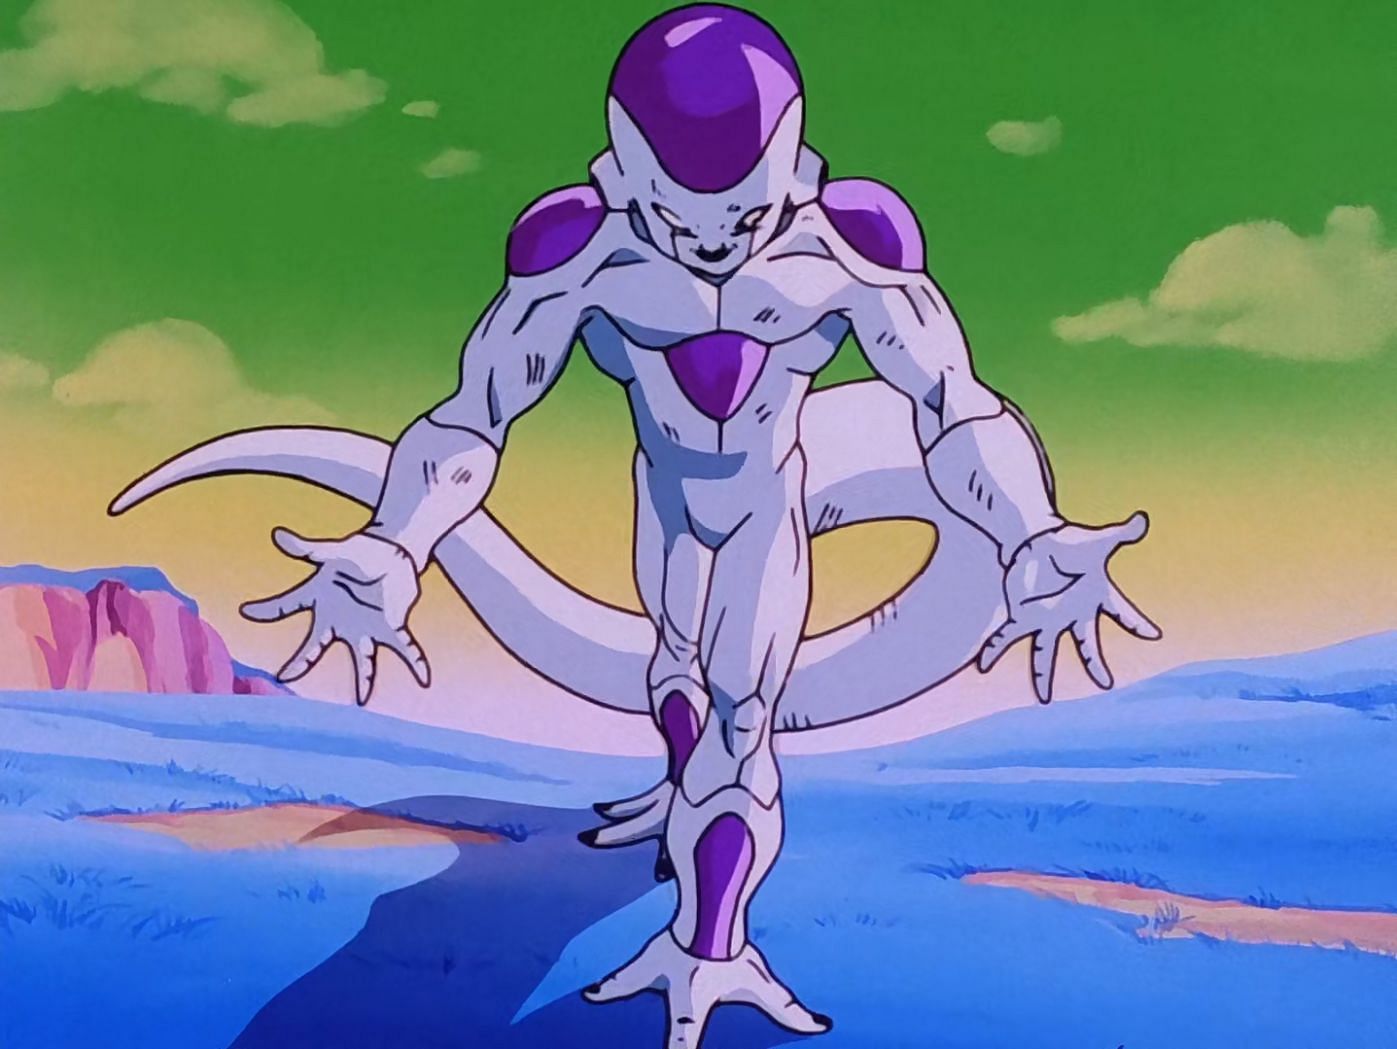 Frieza in his Final Form, as seen during the Frieza saga of Dragon Ball Z (Image via Toei Animation)